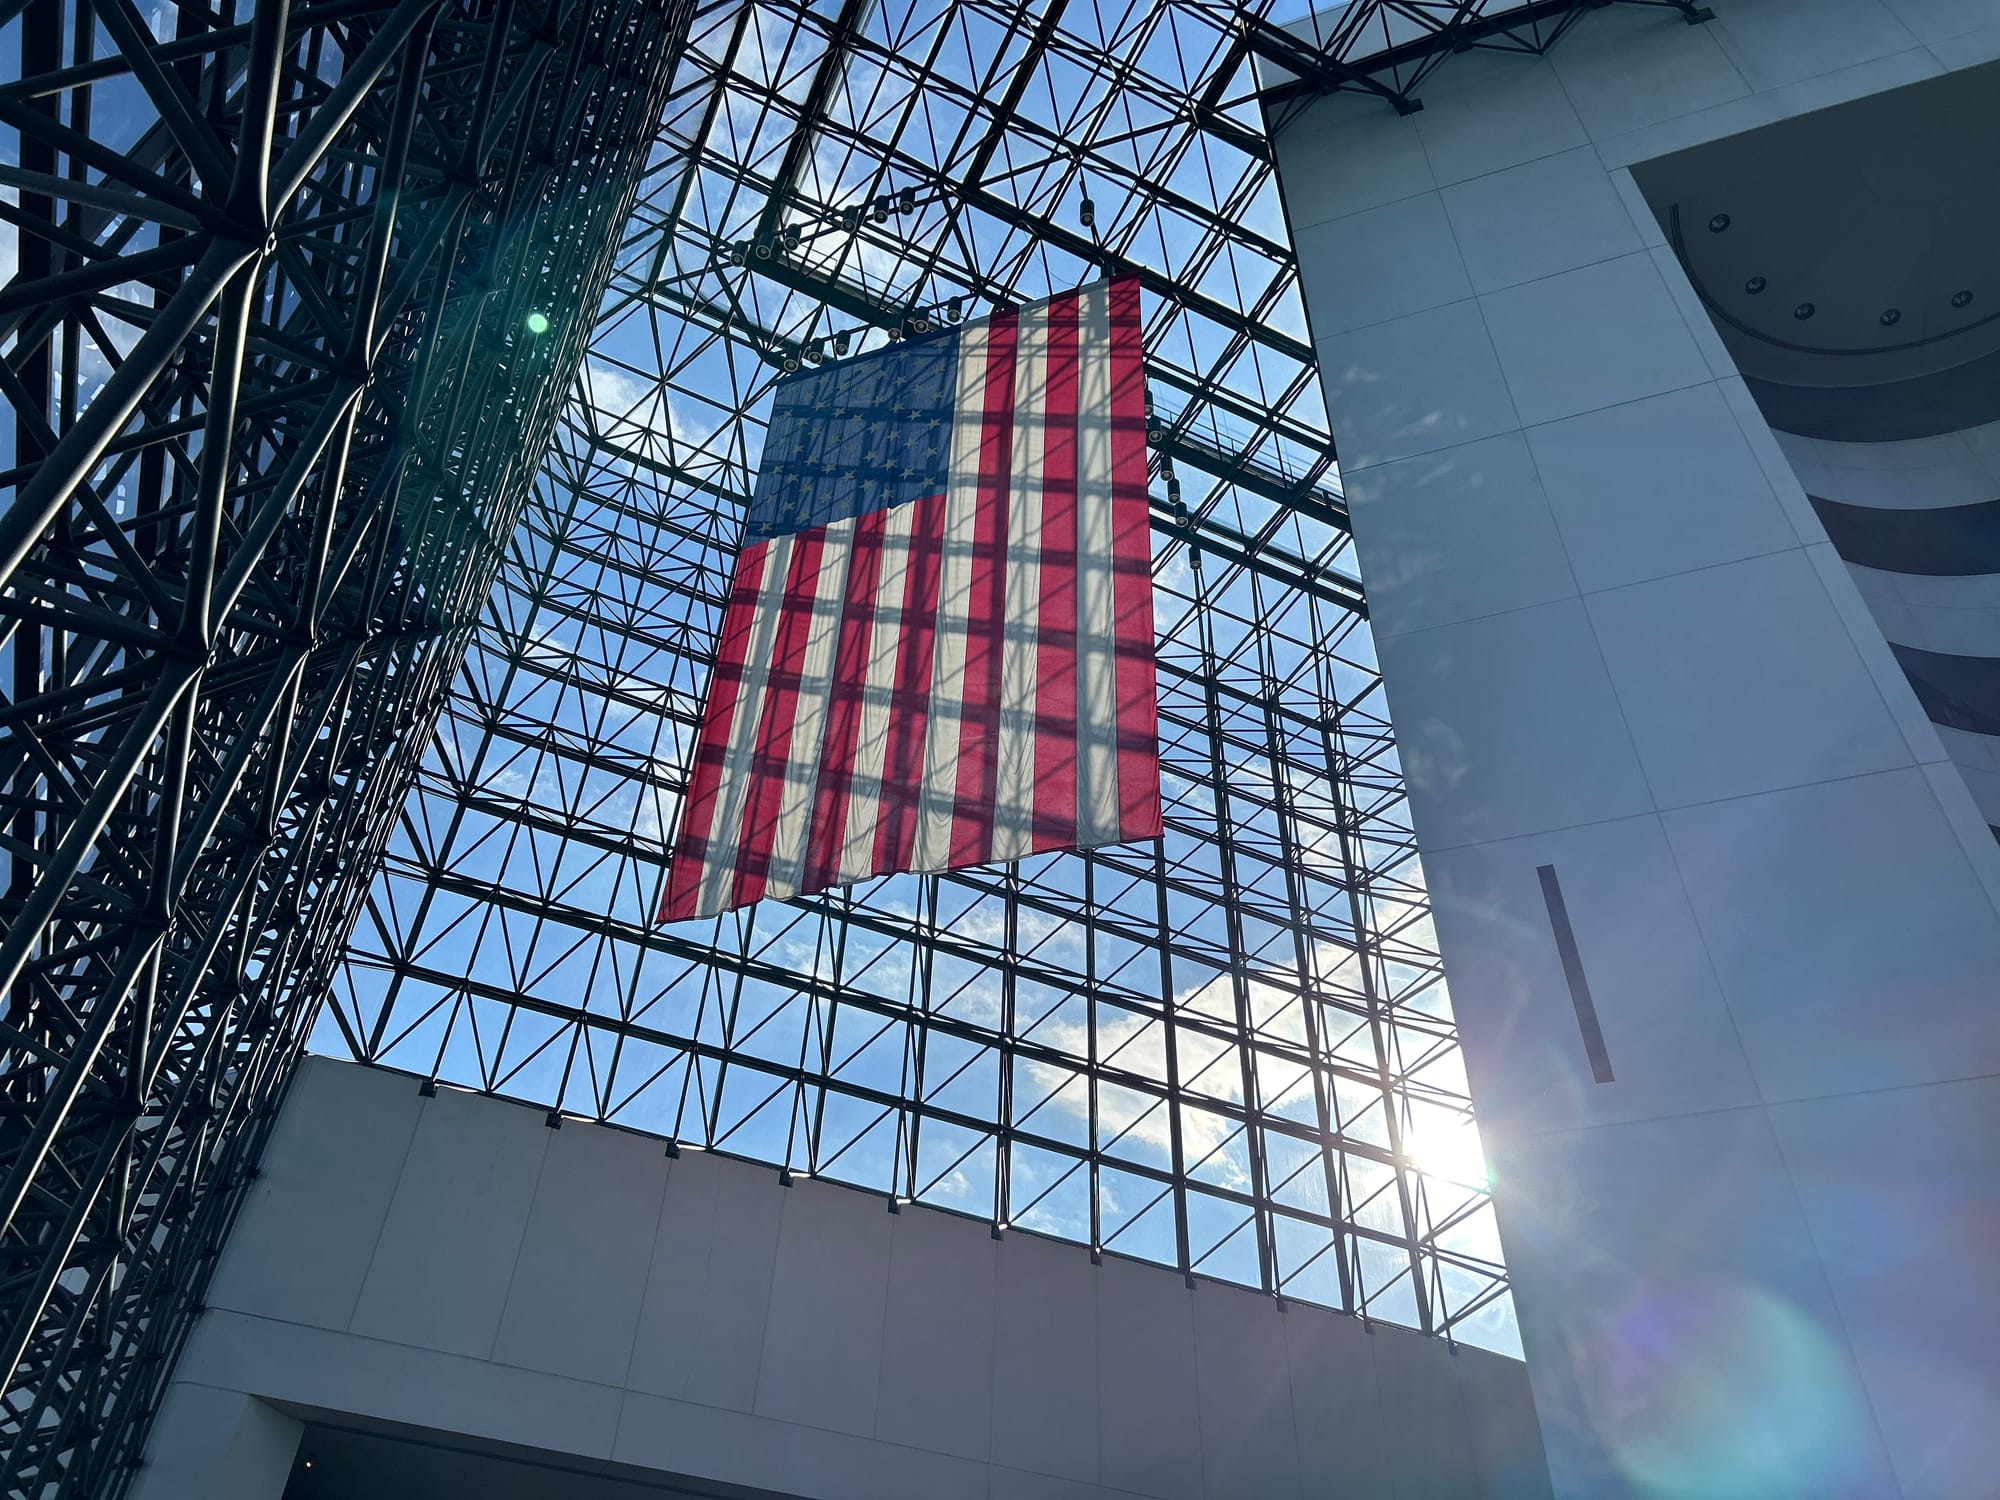 Day Trips: Captivating Exhibits at the John F Kennedy Presidential Library and Museum